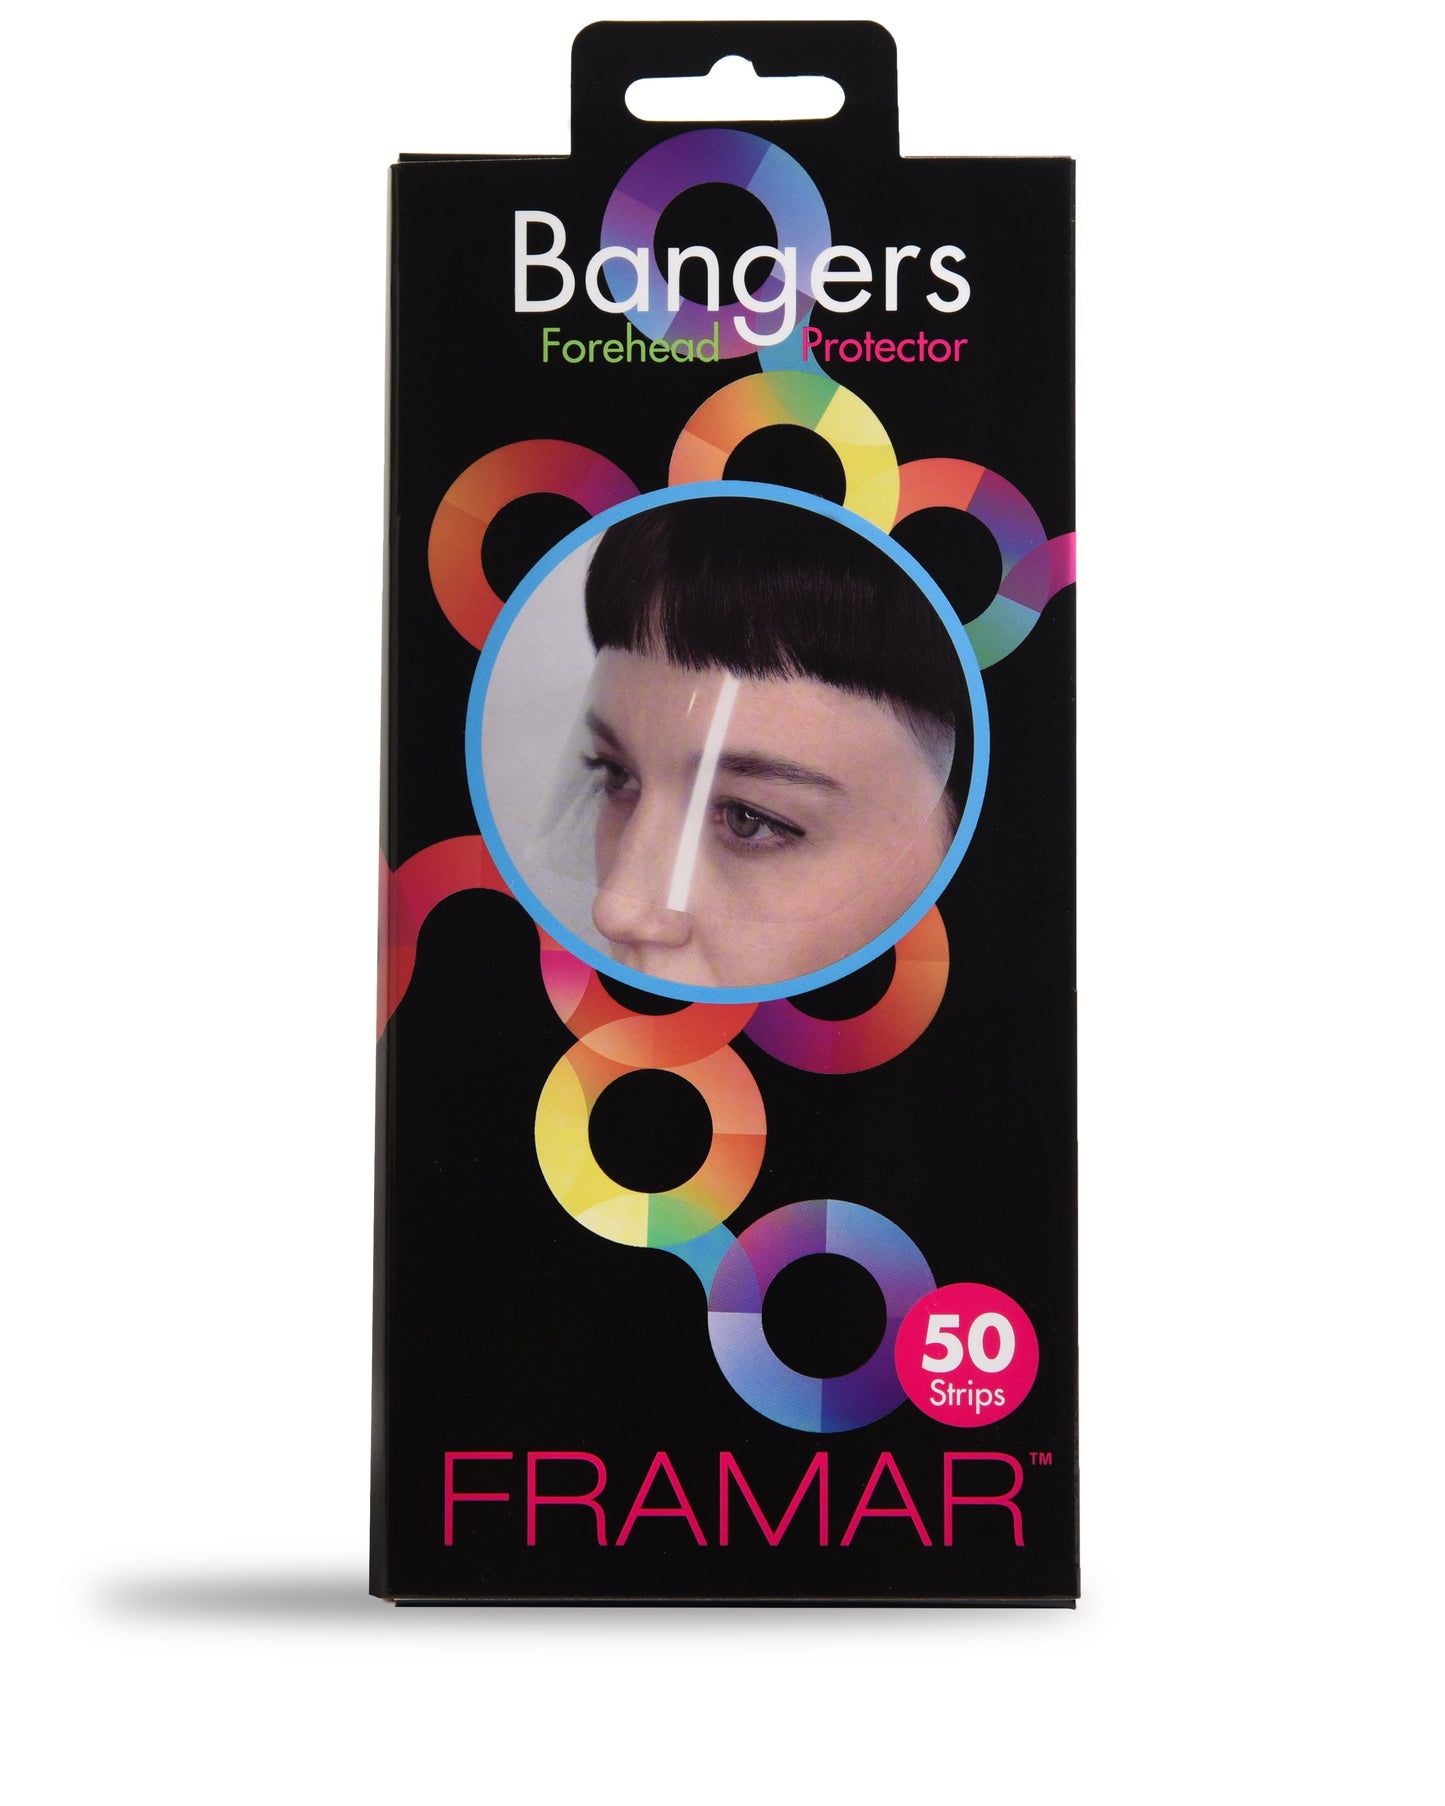 Bangers Forehead Protector (50 strips)